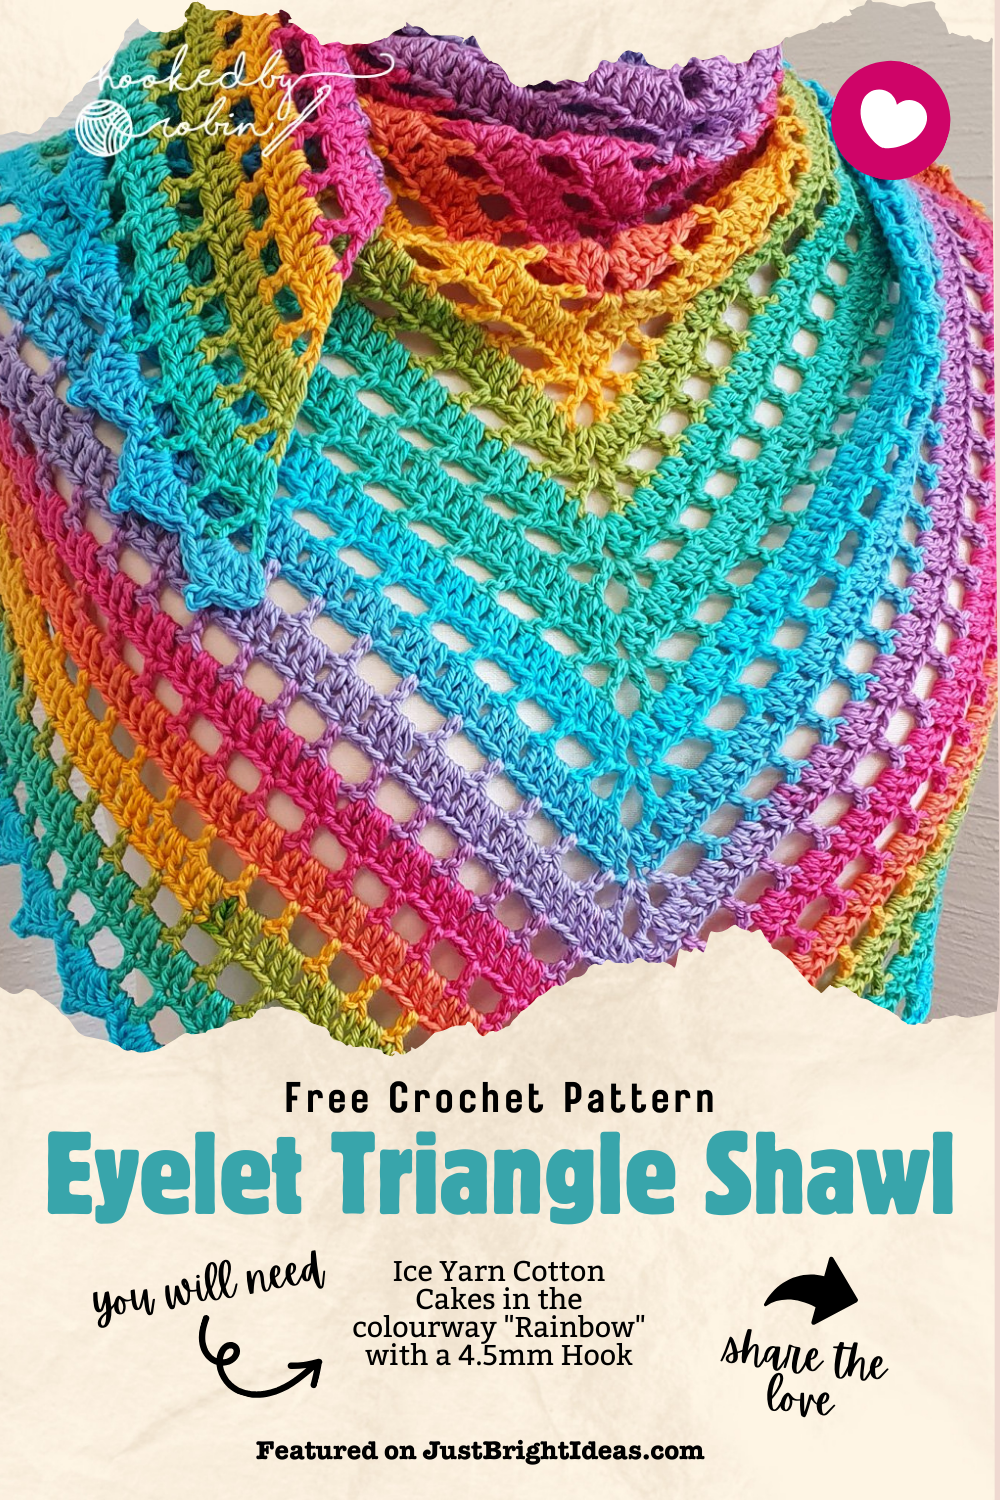 Want a stylish shawl you can make in a snap? This Eyelet Triangle Shawl is perfect for you! Quick to crochet with a simple 2-row repeat. Click for the video tutorial and written pattern! 🧶✨ #CrochetShawl #DIYFashion
